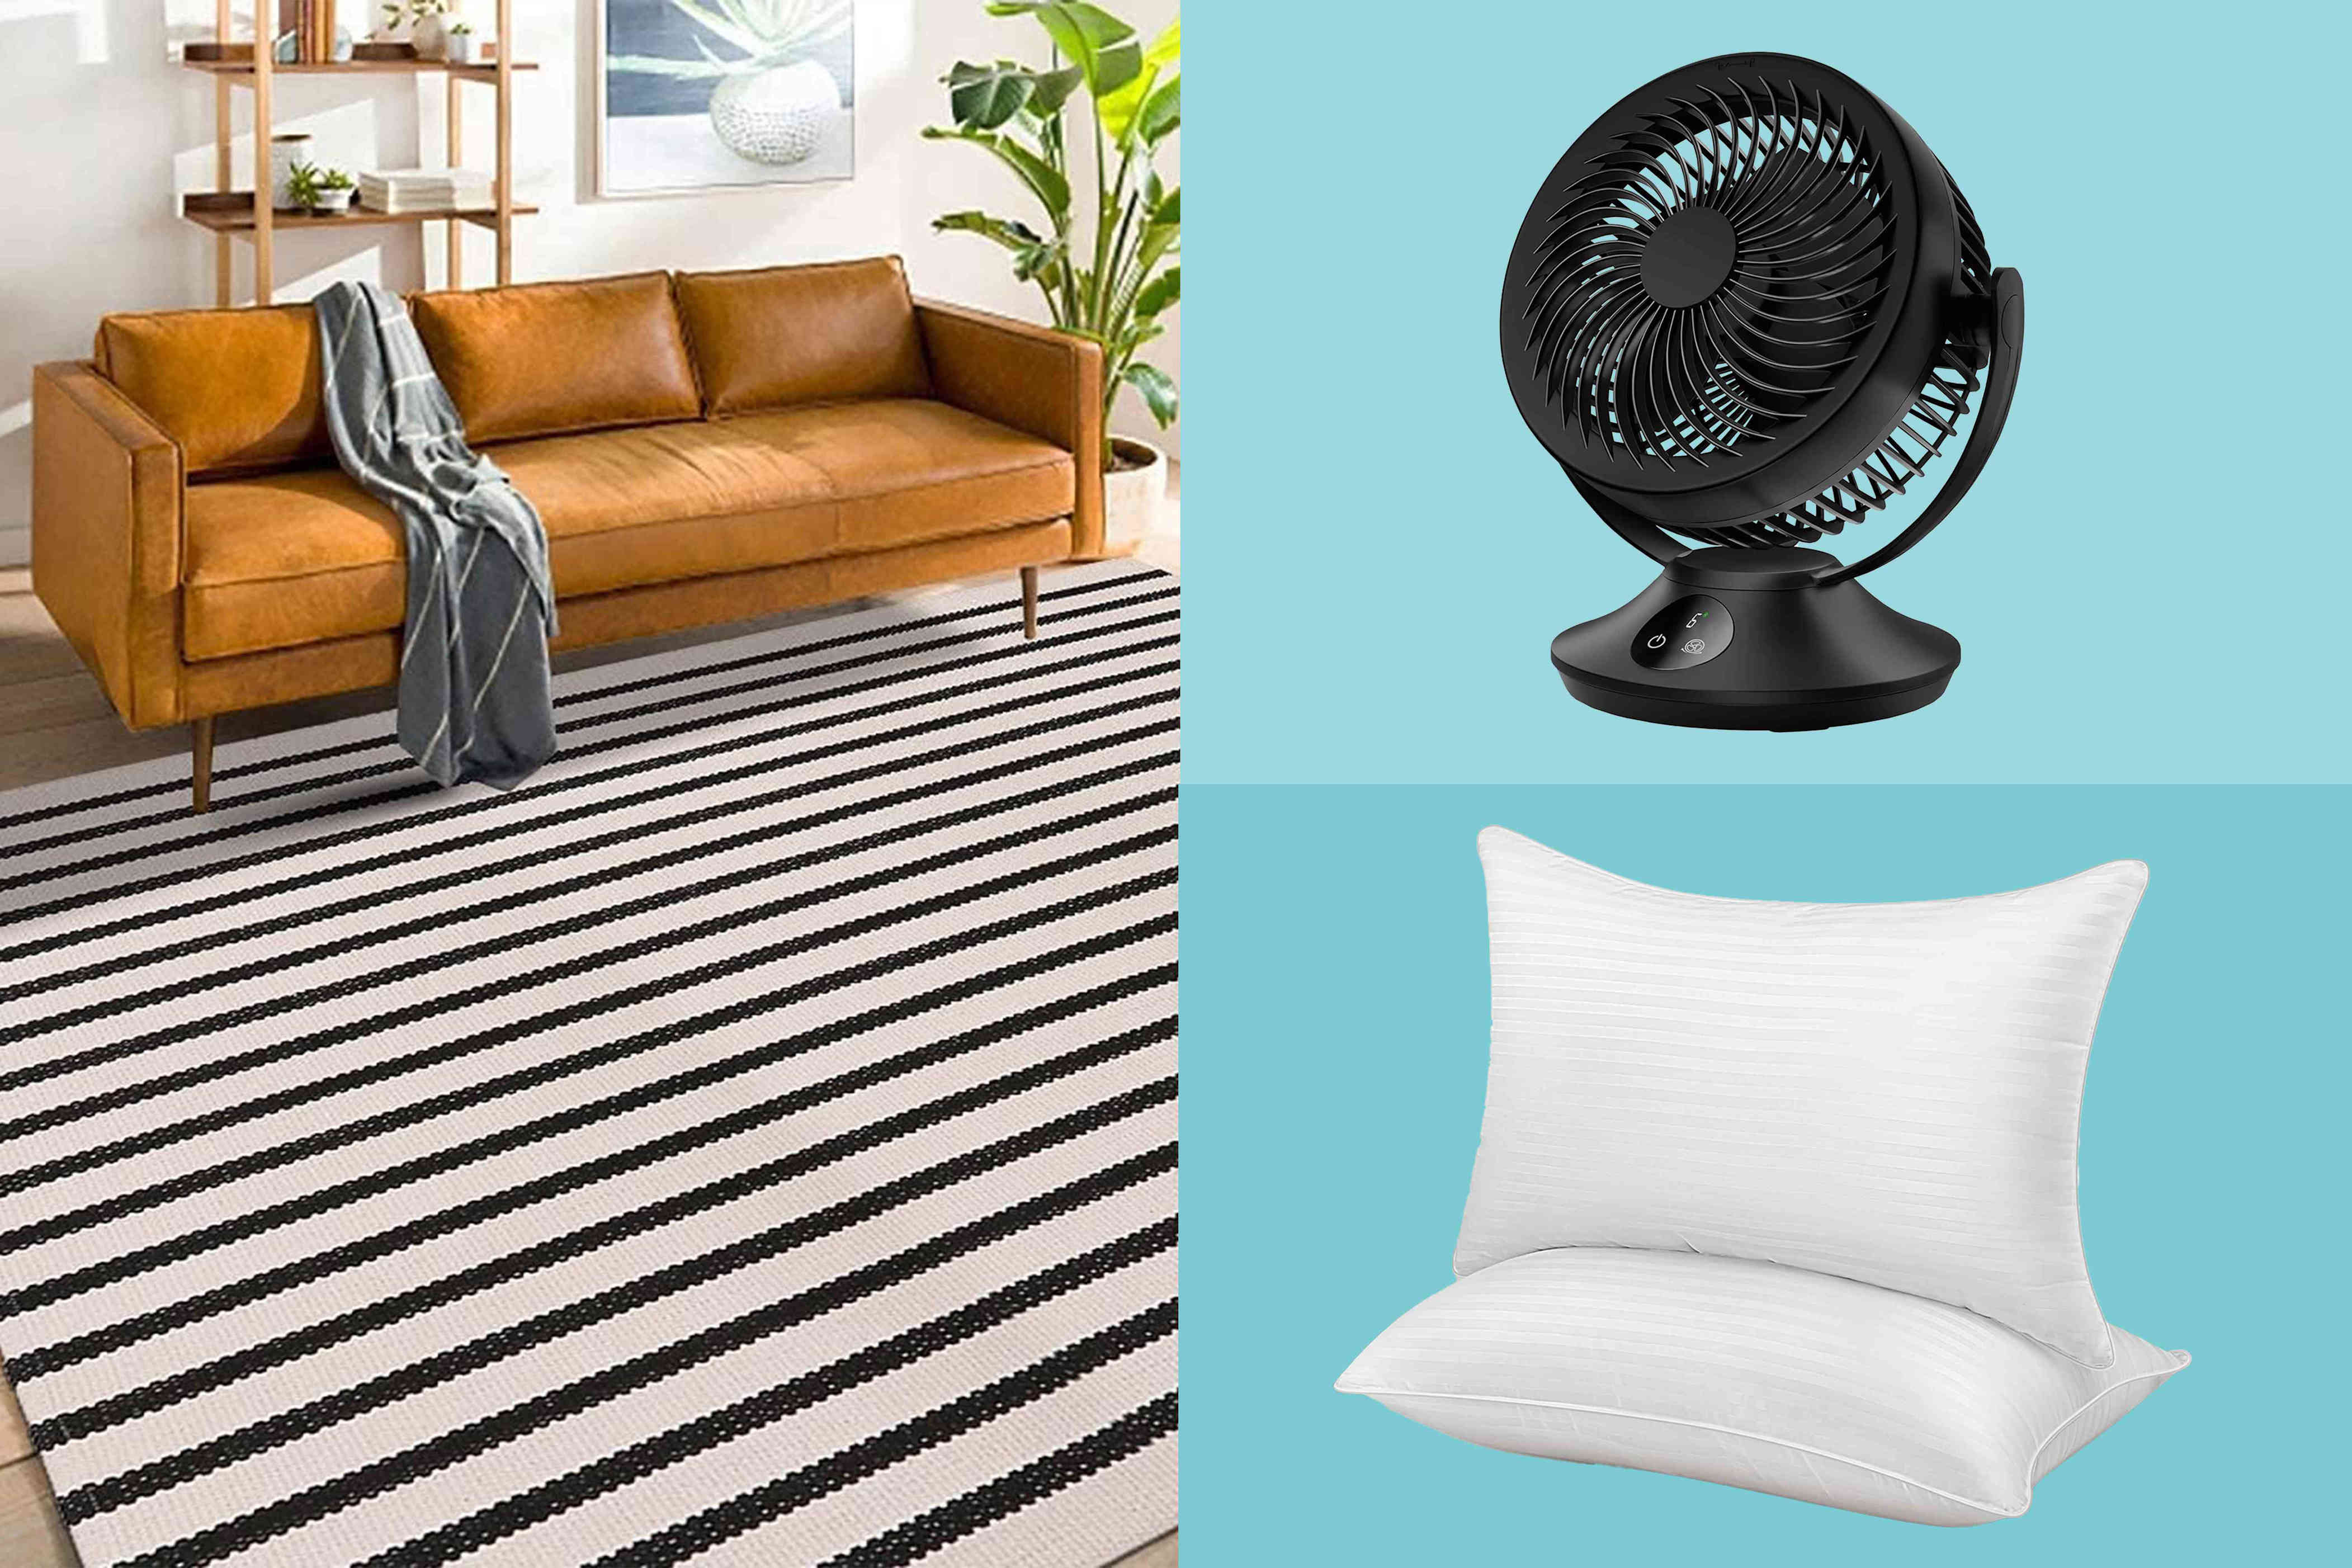 amazon, we scoured amazon to find the 10 best deals over 70% off—including outdoor rugs, vacuums, and air purifiers